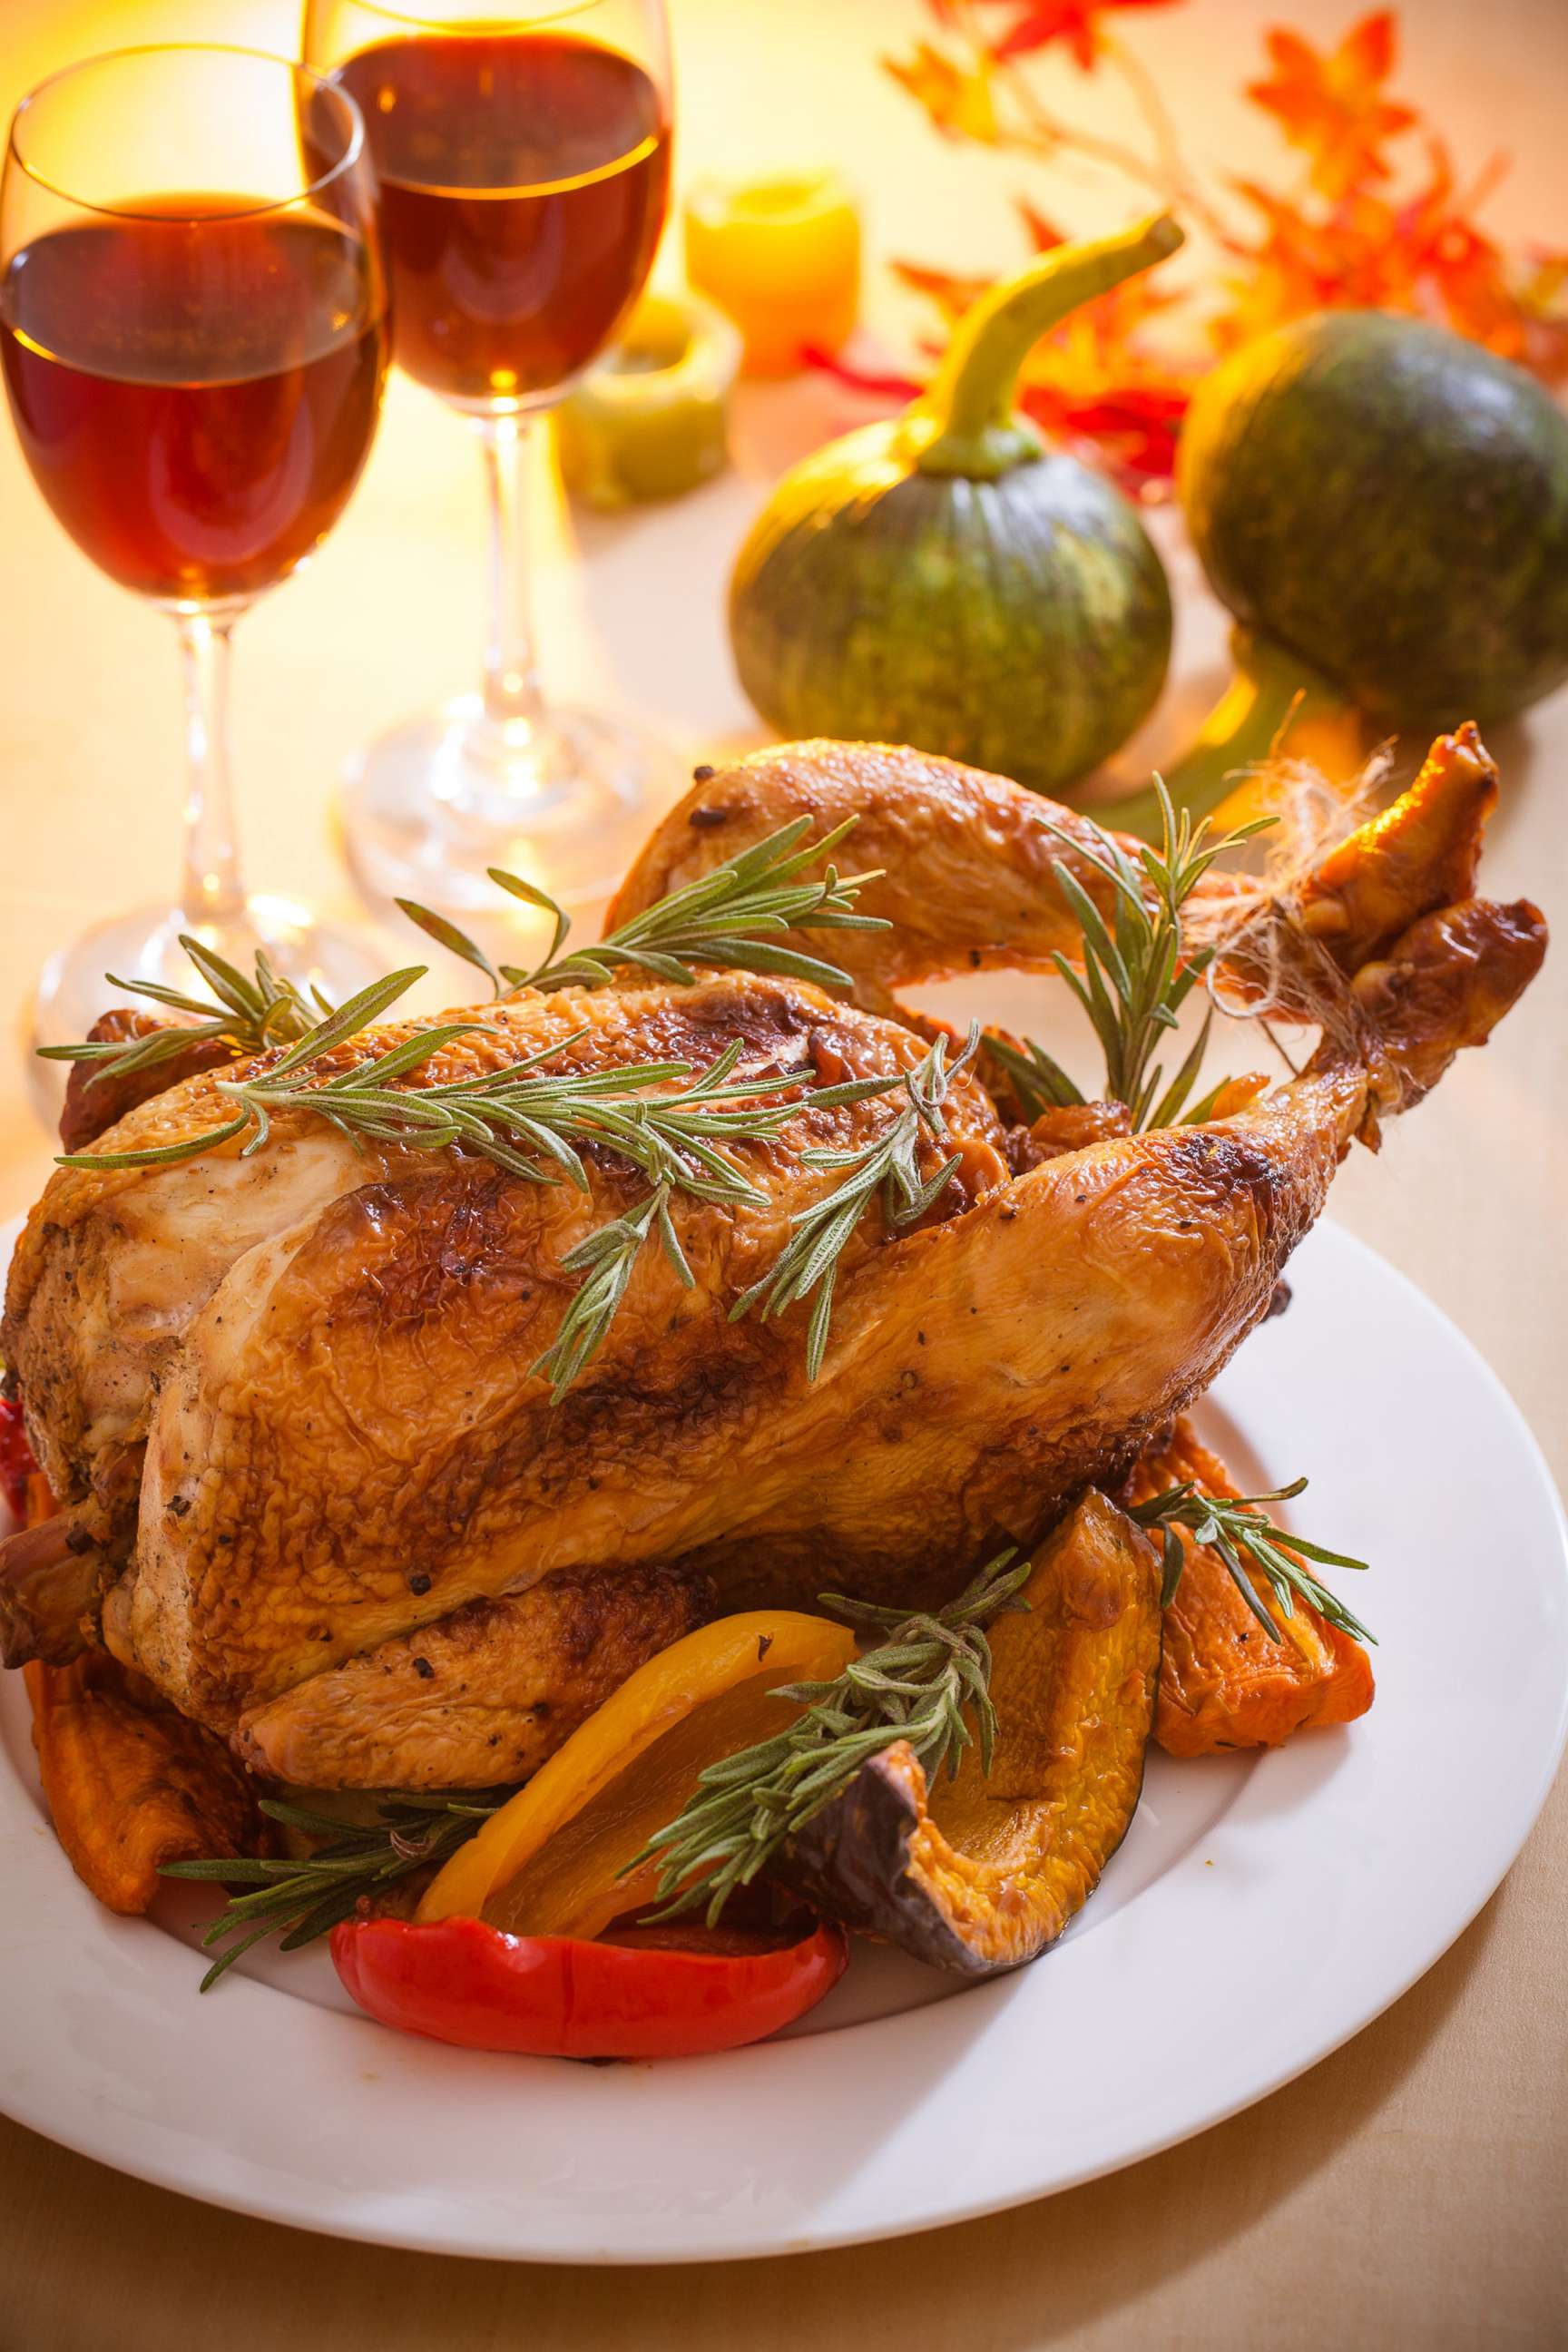 PHOTO: A roasted turkey is served for Thanksgiving dinner in this undated stock photo. 